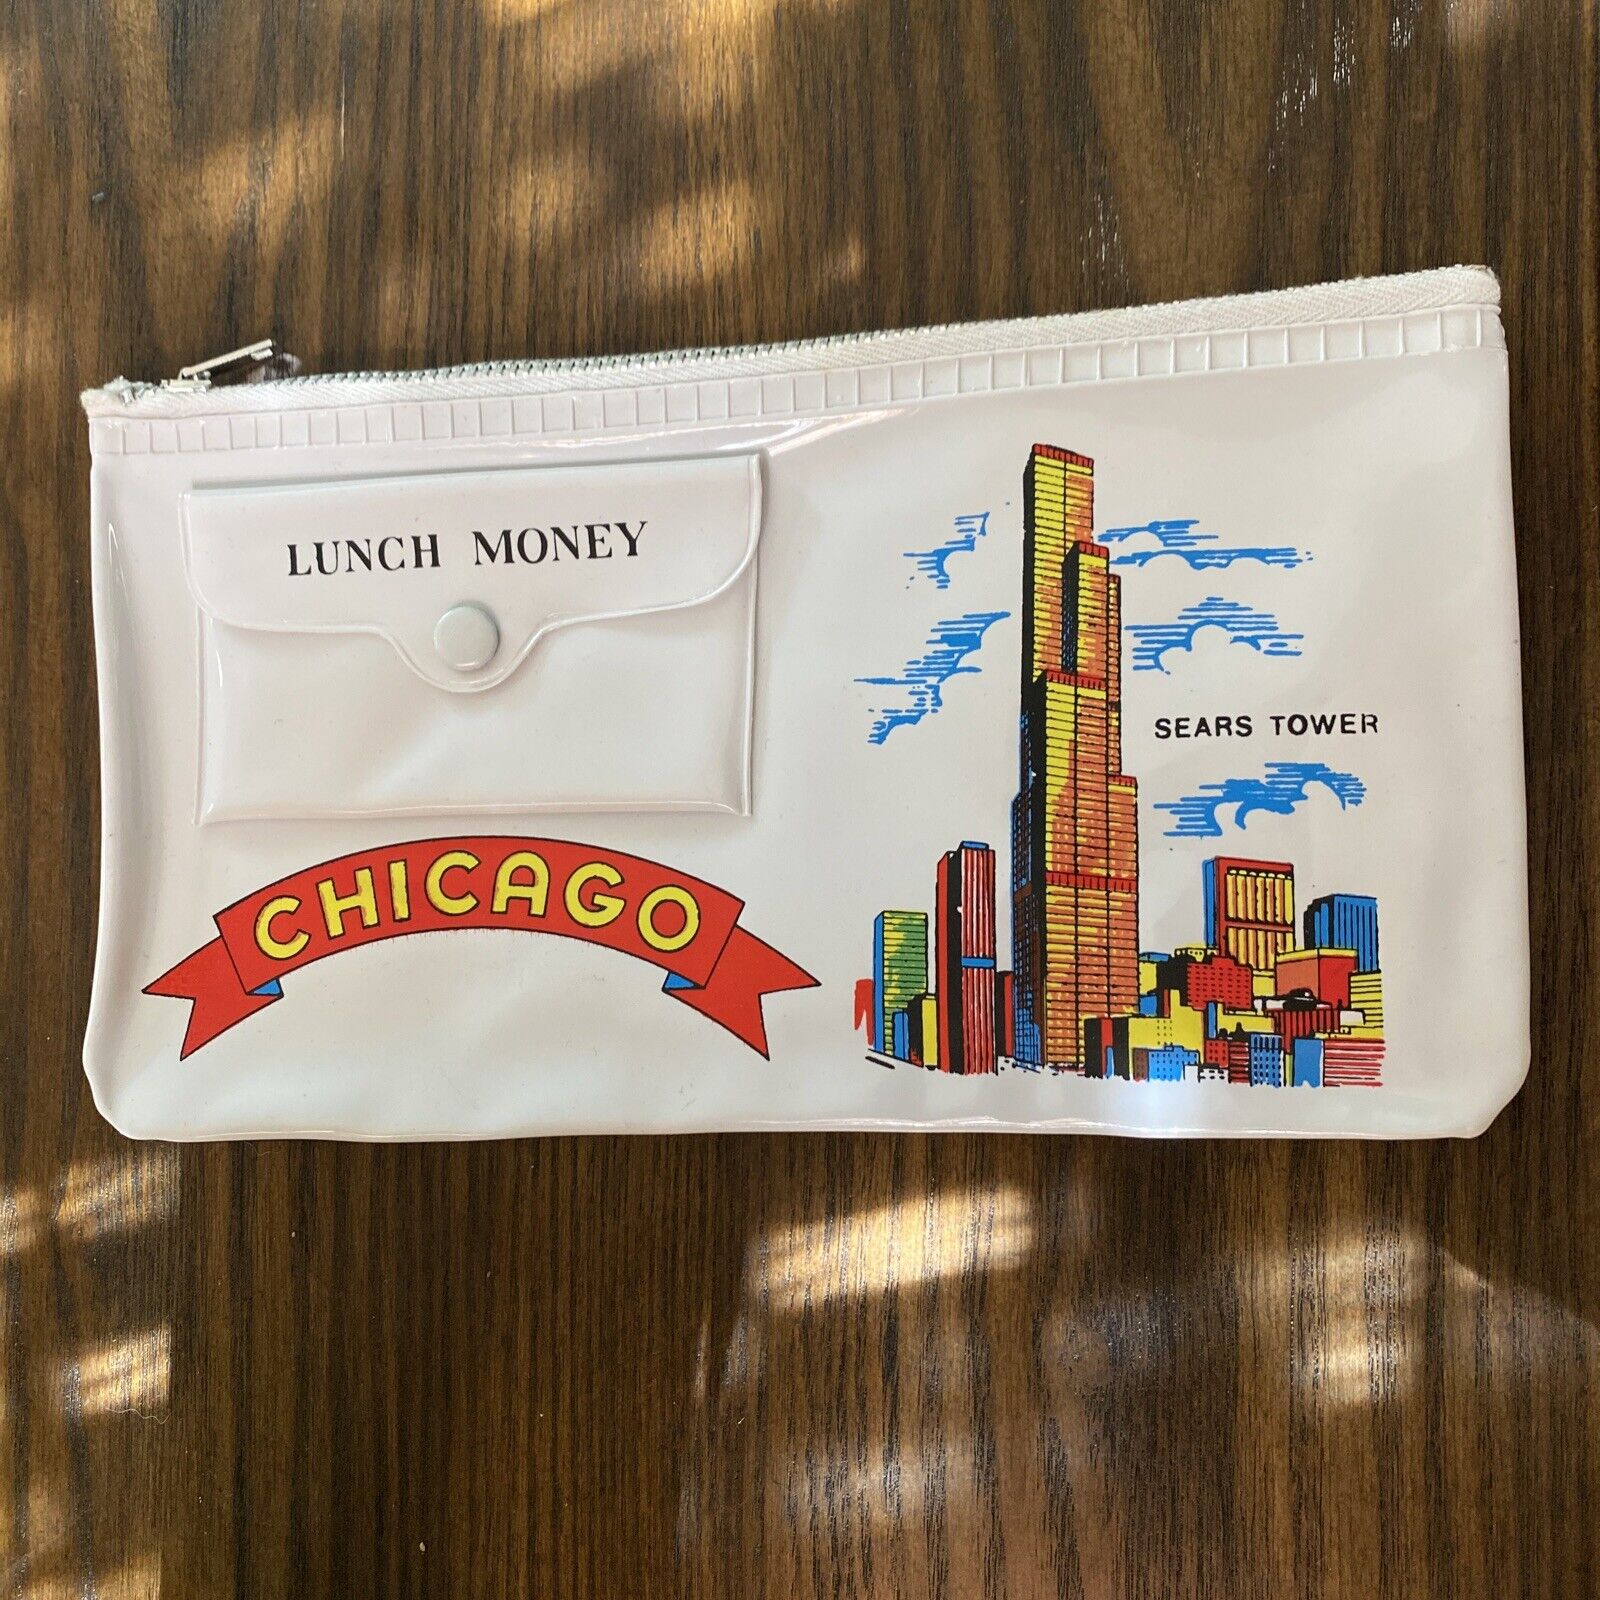 Vintage Chicago Lunch Money Pencil Pouch Sears Tower Vibrant Color